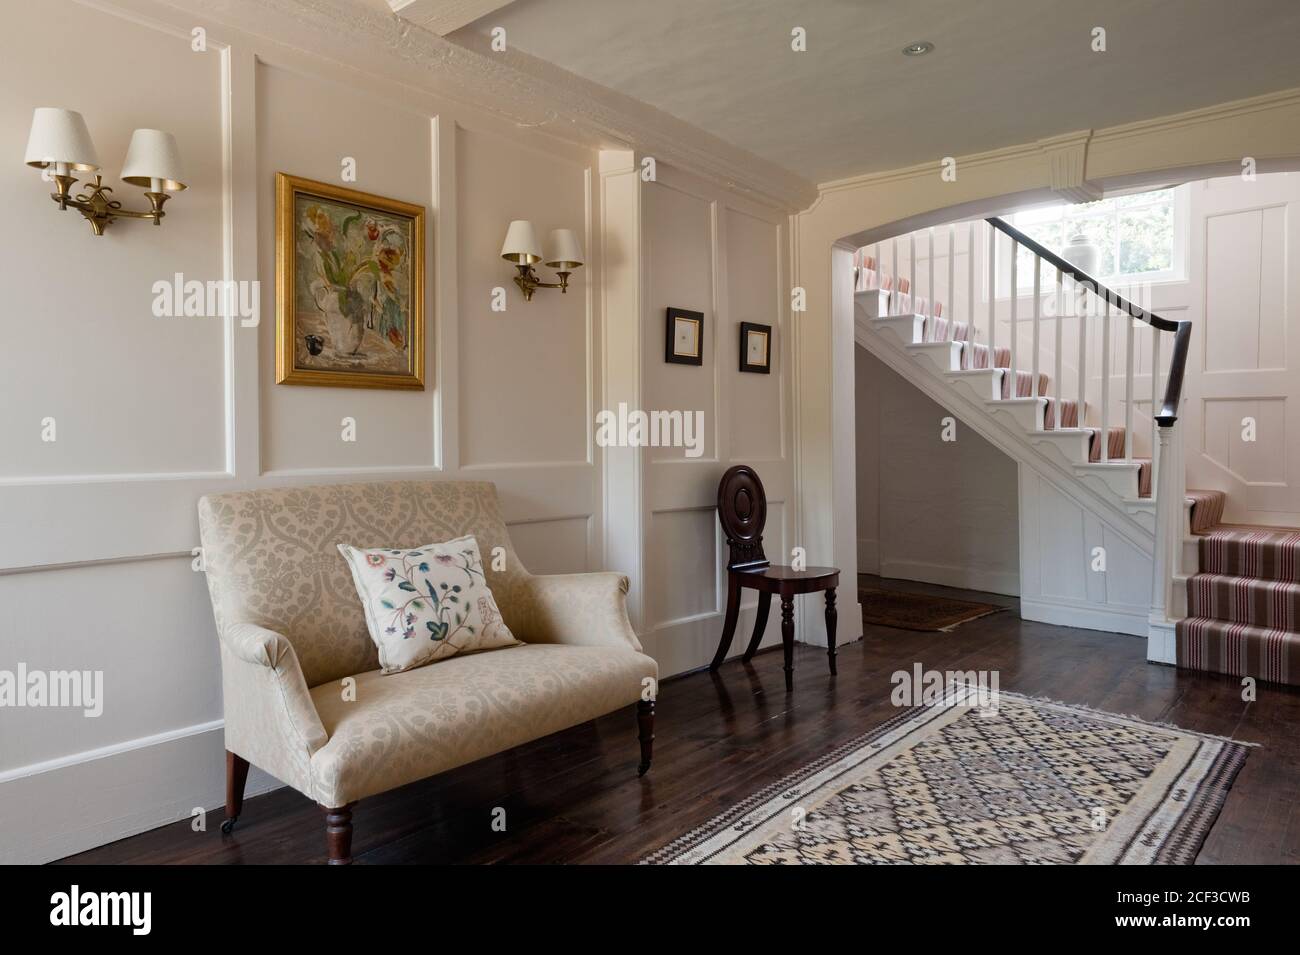 Oversized armchair in entrance hall Stock Photo